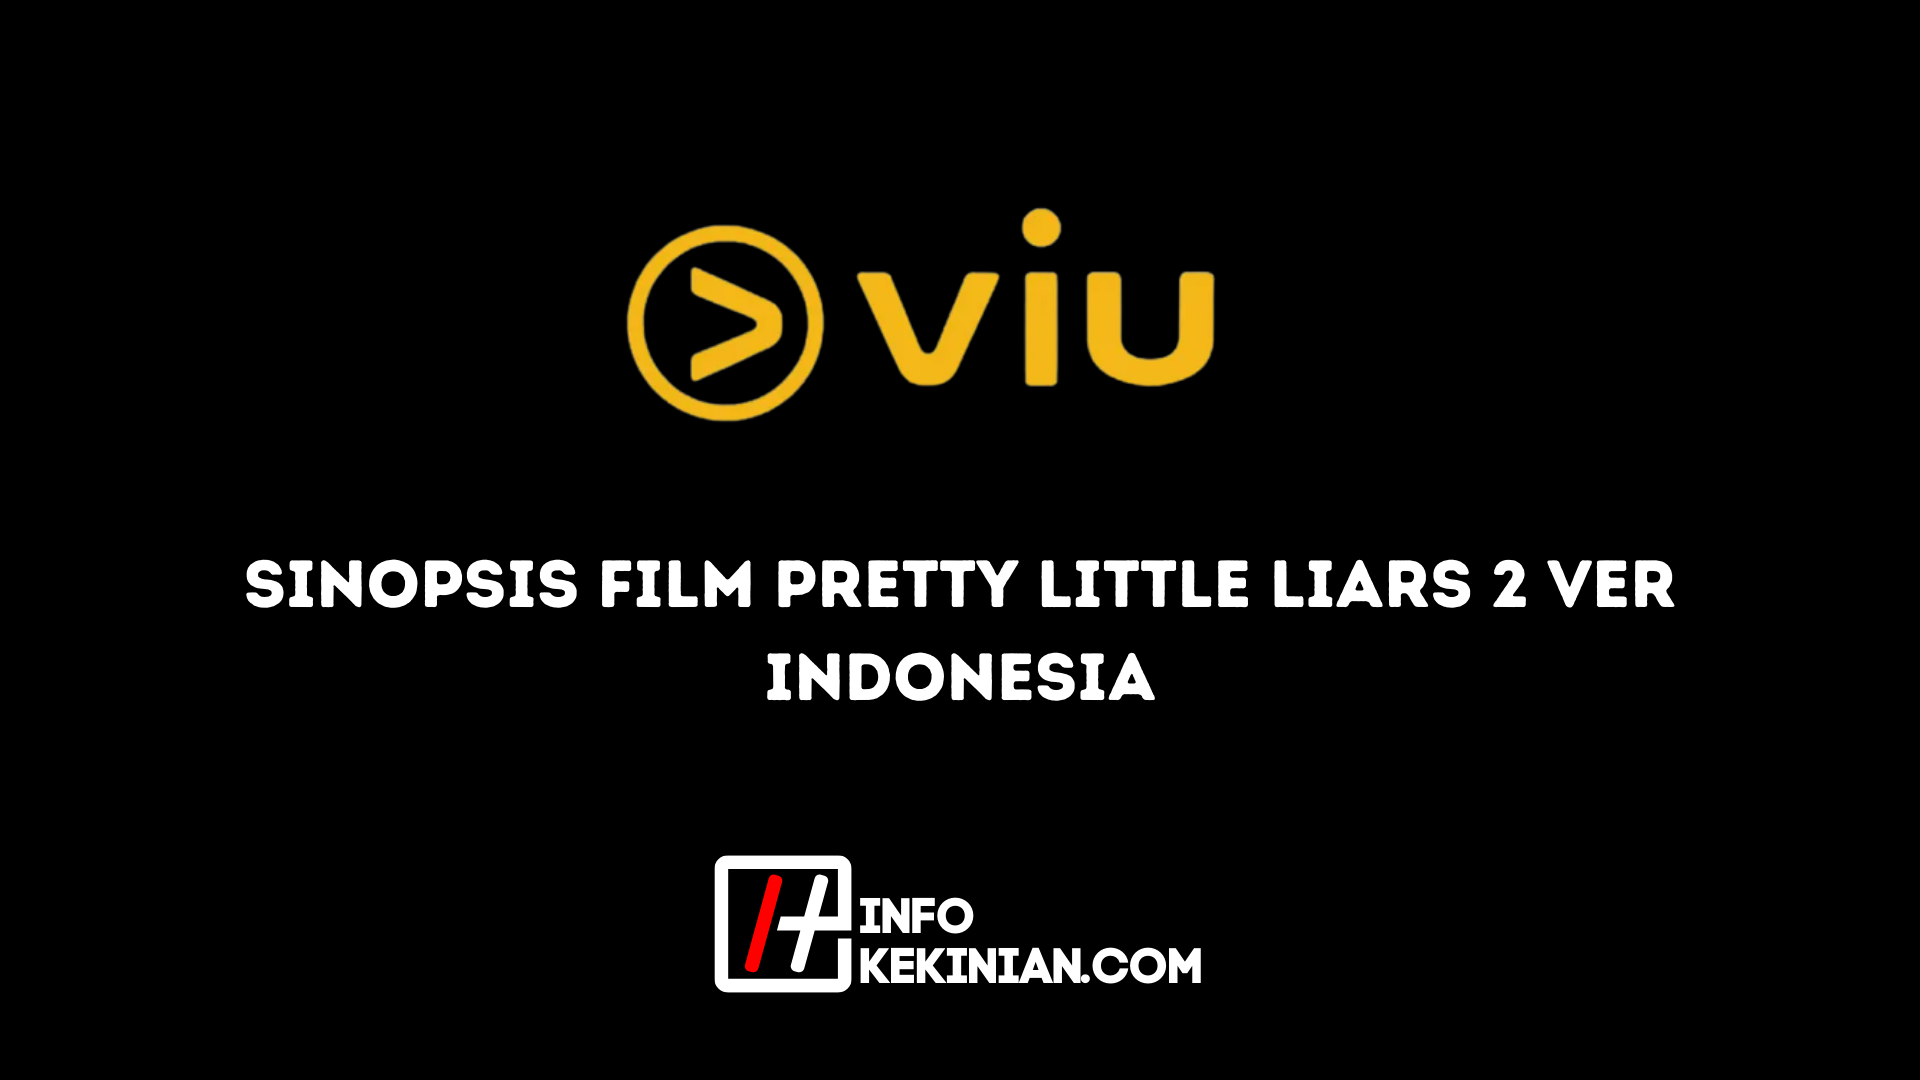 Synopsis Film Pretty Little Liars 2 Indonesian Ver